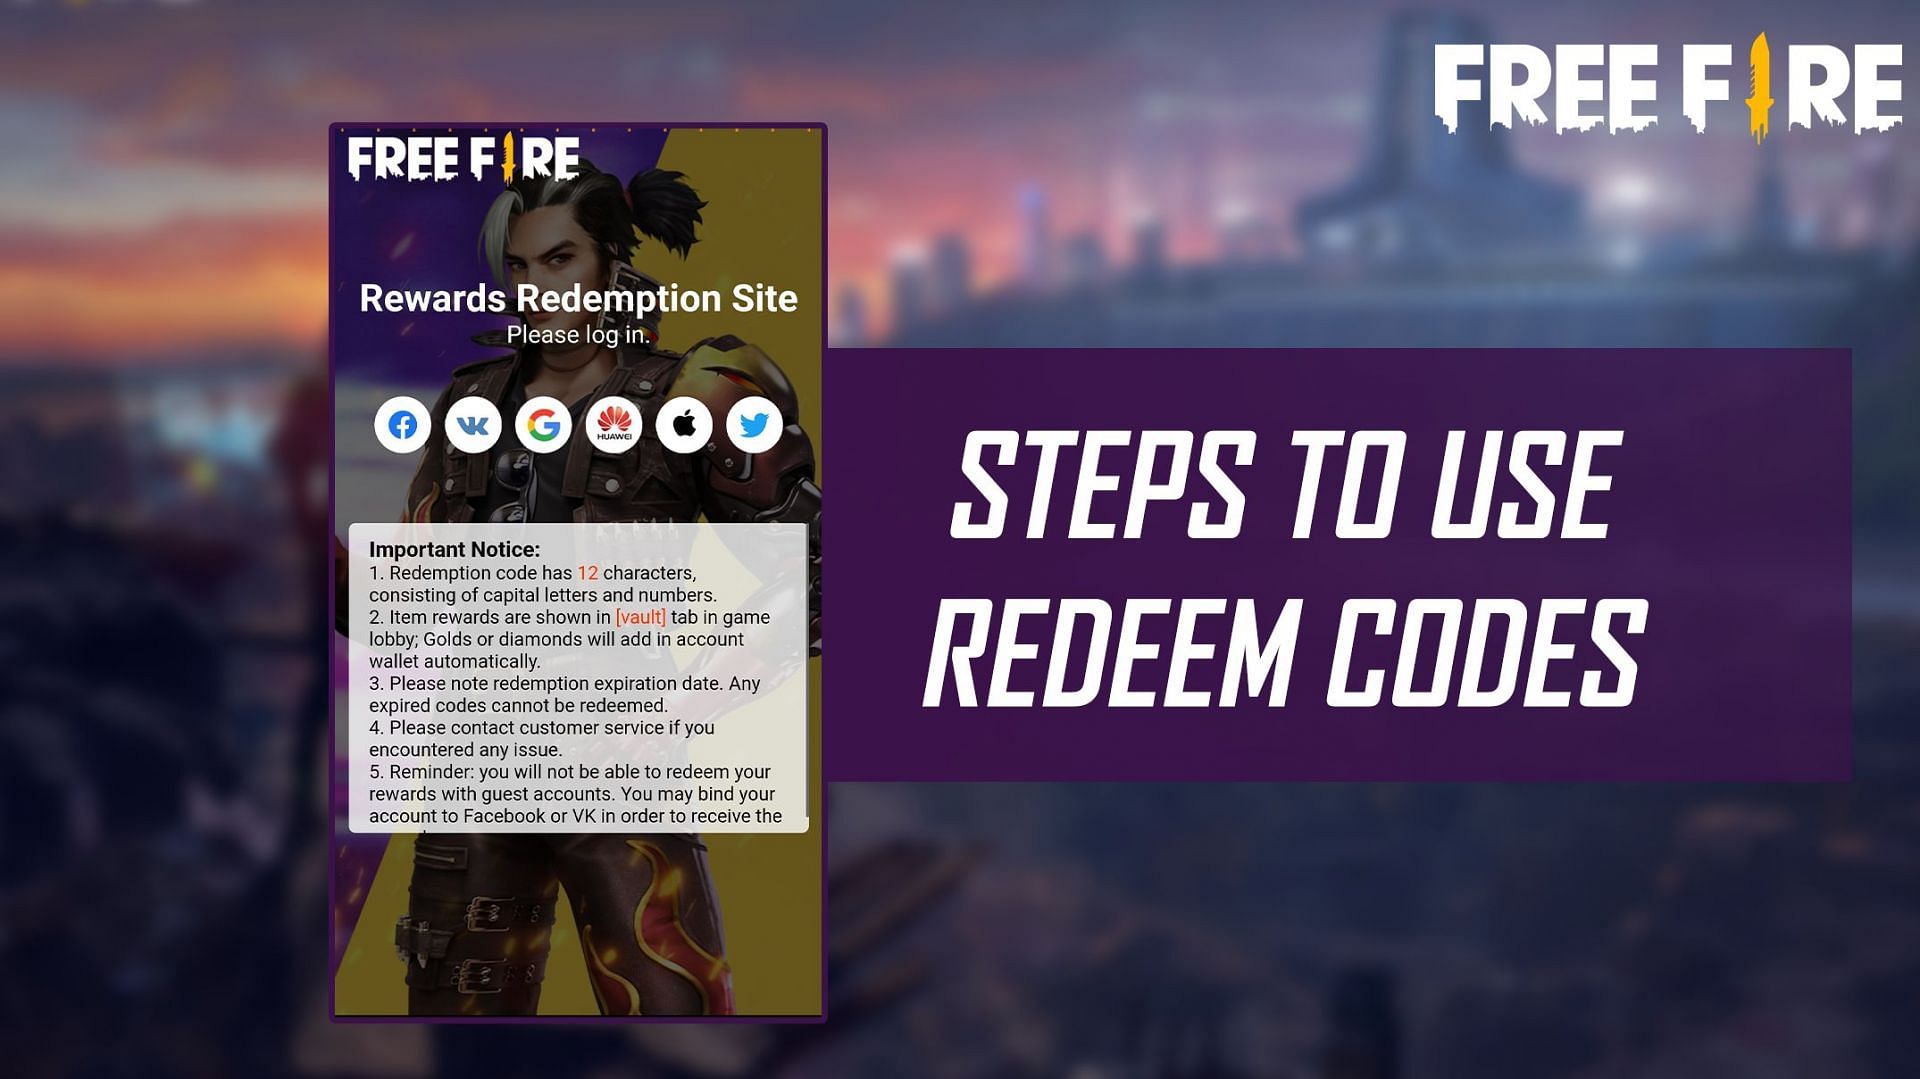 Guide to use redeem code (Image via Free Fire)